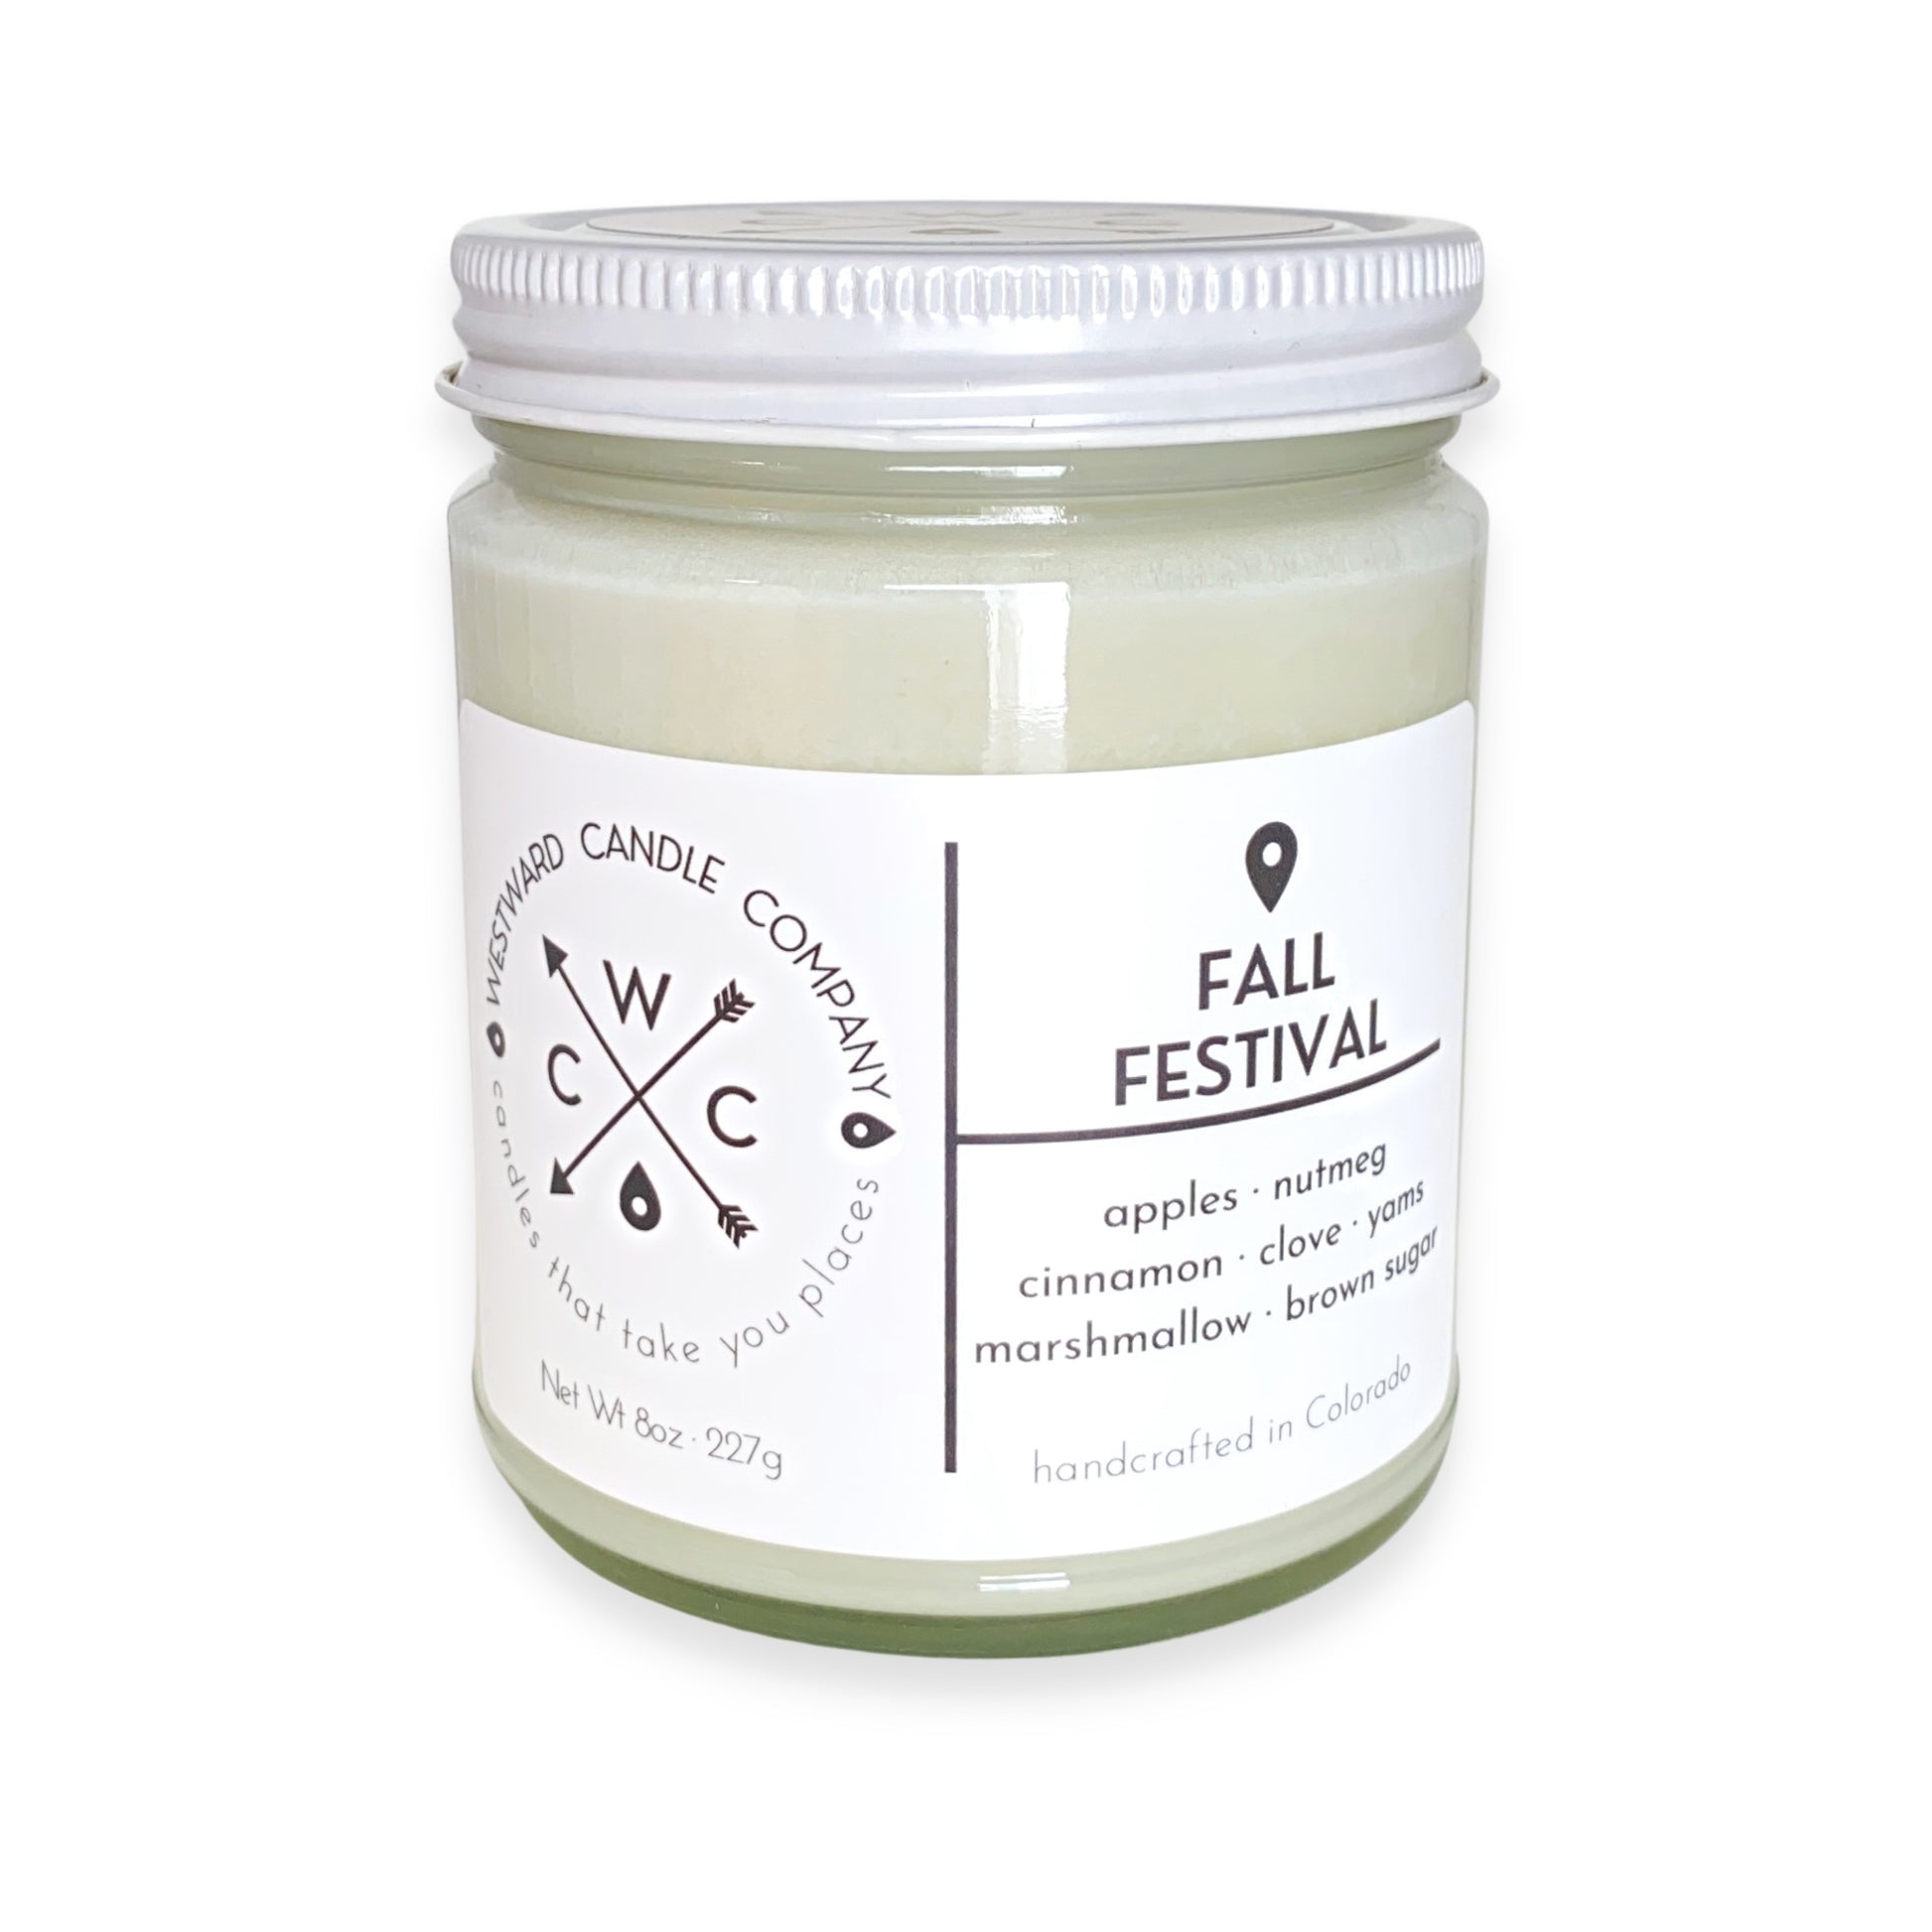 Fall Festival Soy Candle. Westward's Fall Festival candle combines the familiar scents of an autumn afternoon well spent. Gender neutral design. Handmade in Colorado with 100% soy wax, lead-free wick, phthalate-free fragrance oil and essential oil blend. Apples, Nutmeg, Cinnamon, Clove, Yams, Marshmallow, and Brown Sugar. 